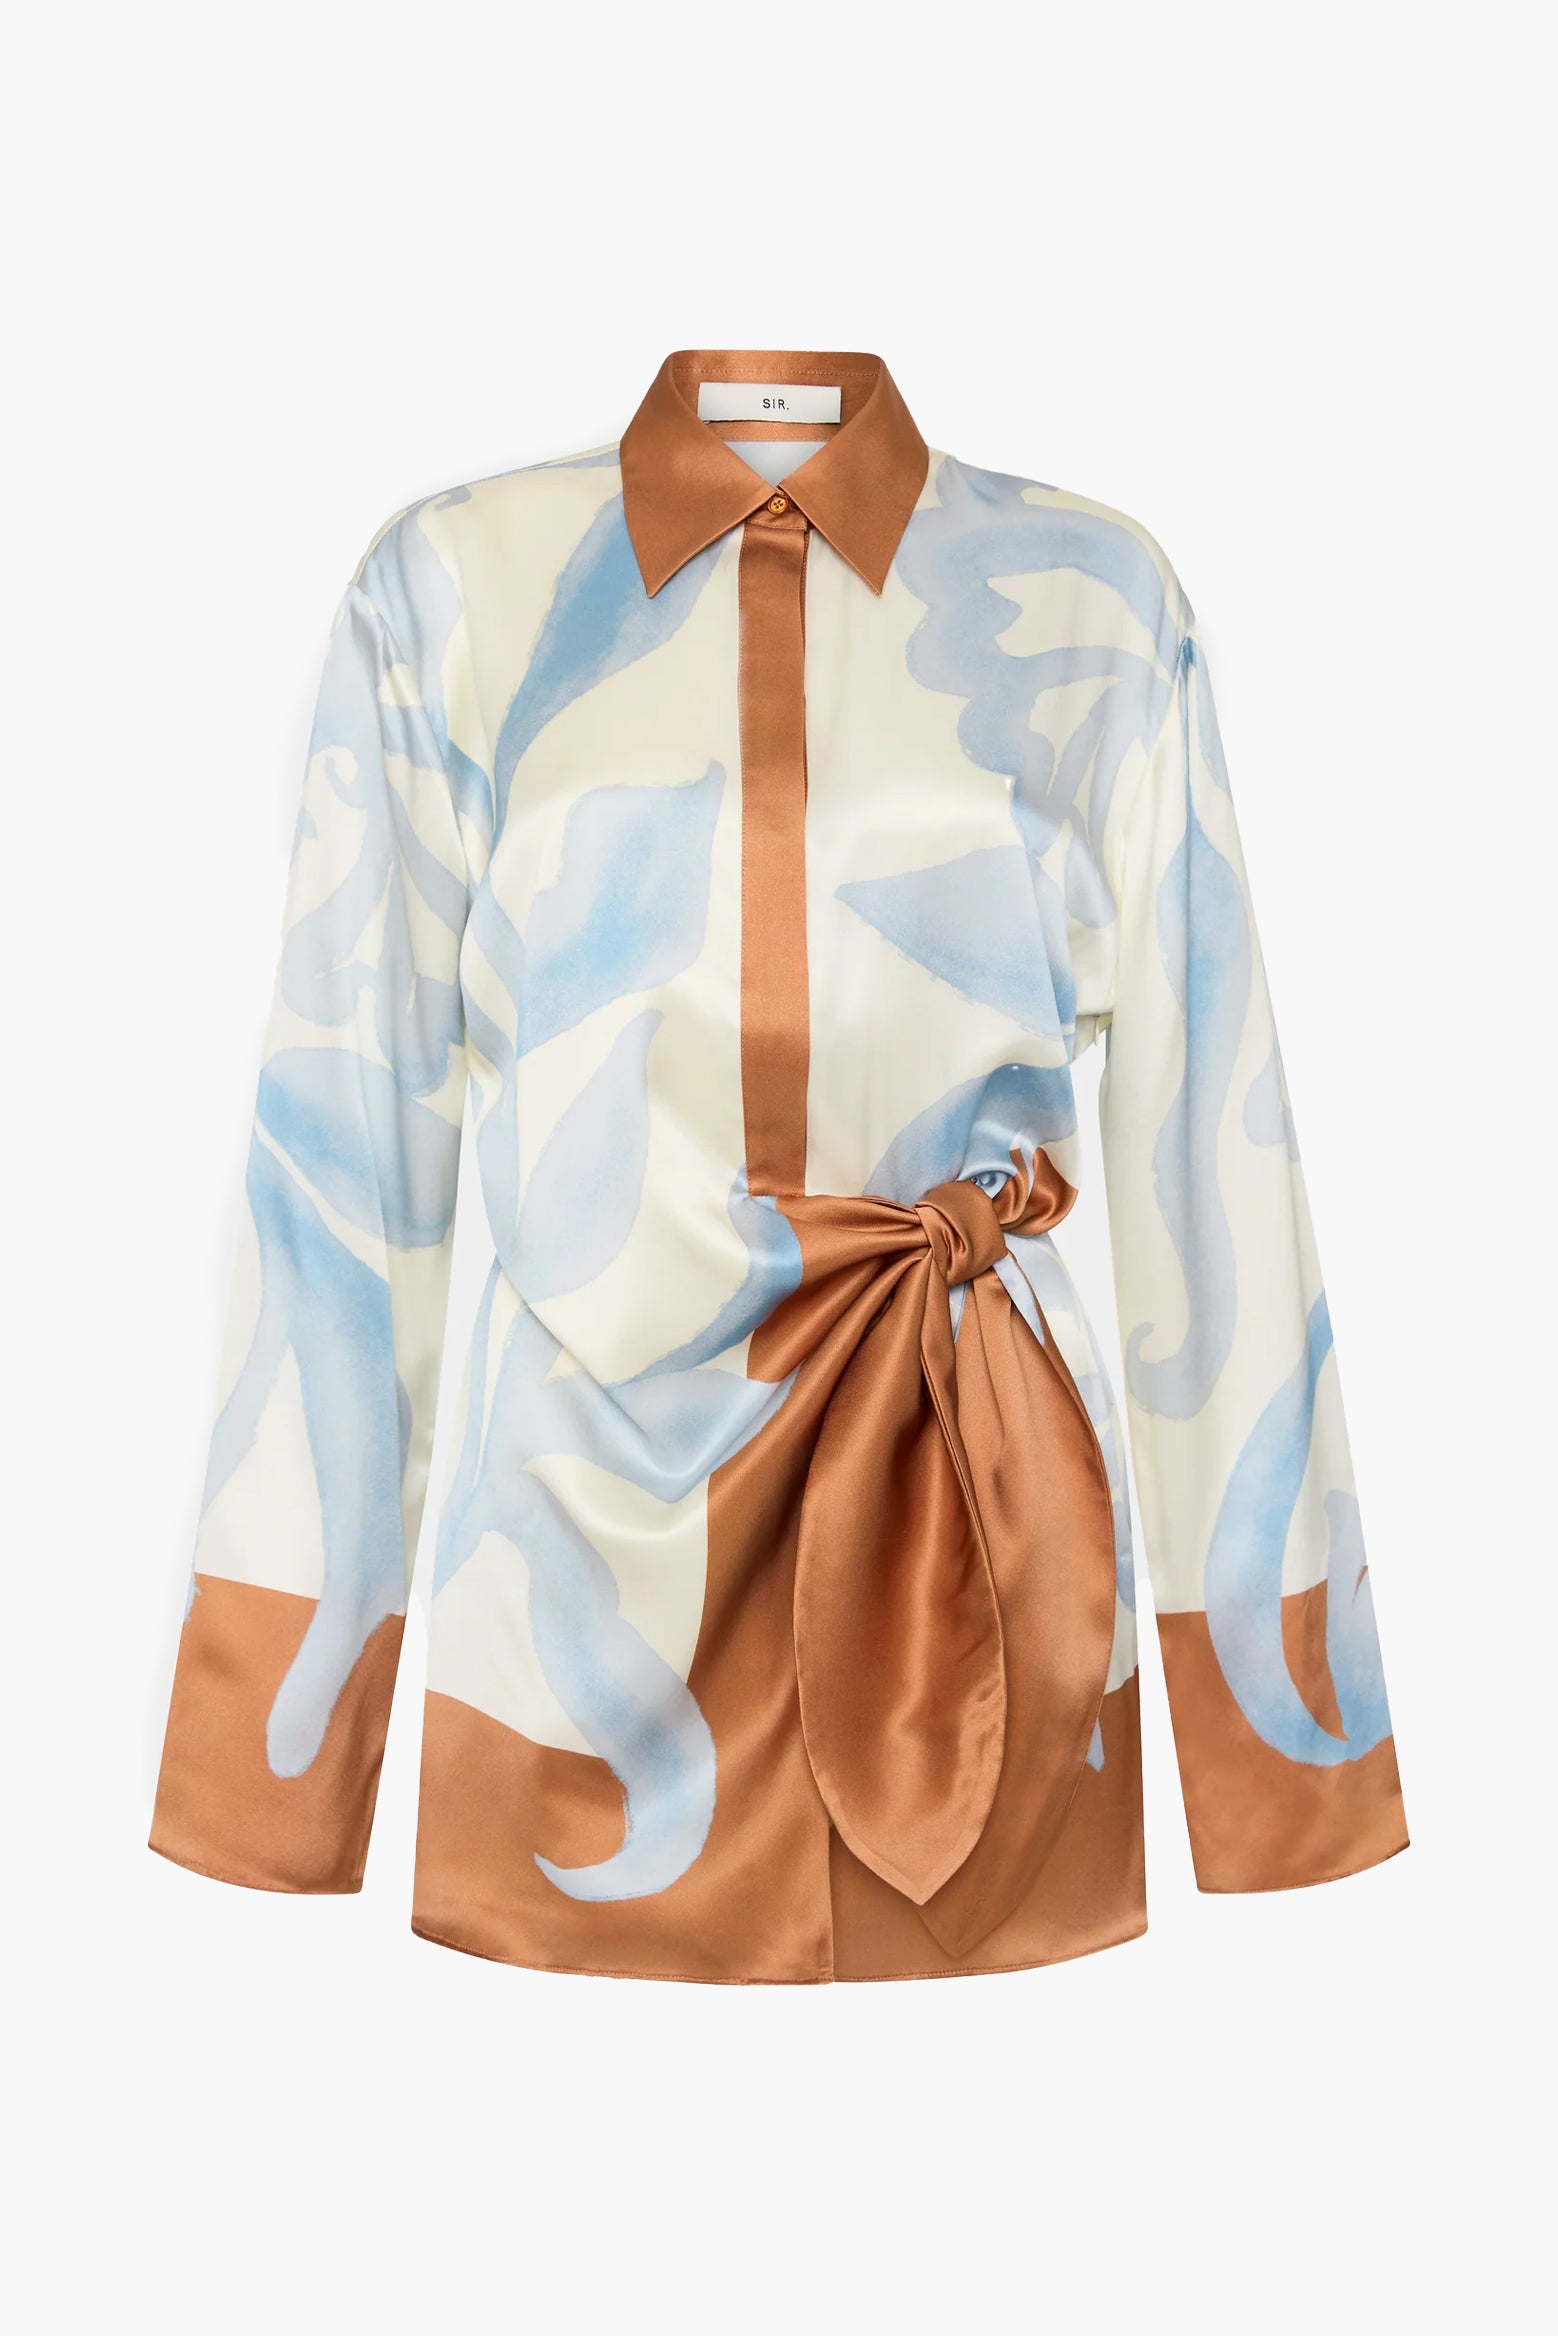 SIR Sorrento Shirtdress in Sciarpa Print available at The New Trend Australia. 